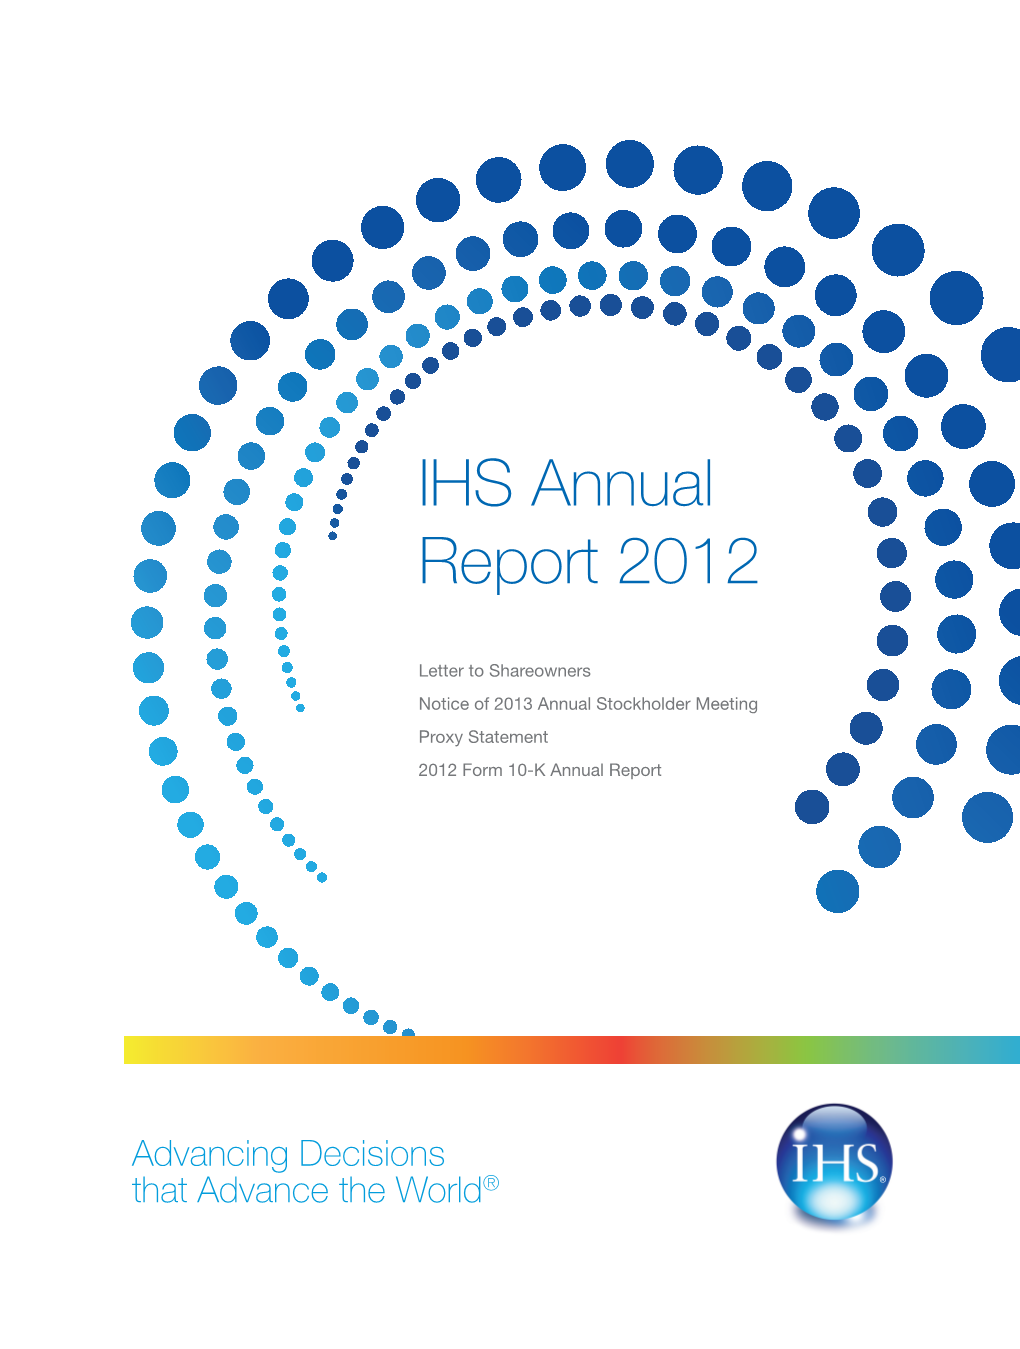 IHS Annual Report 2012